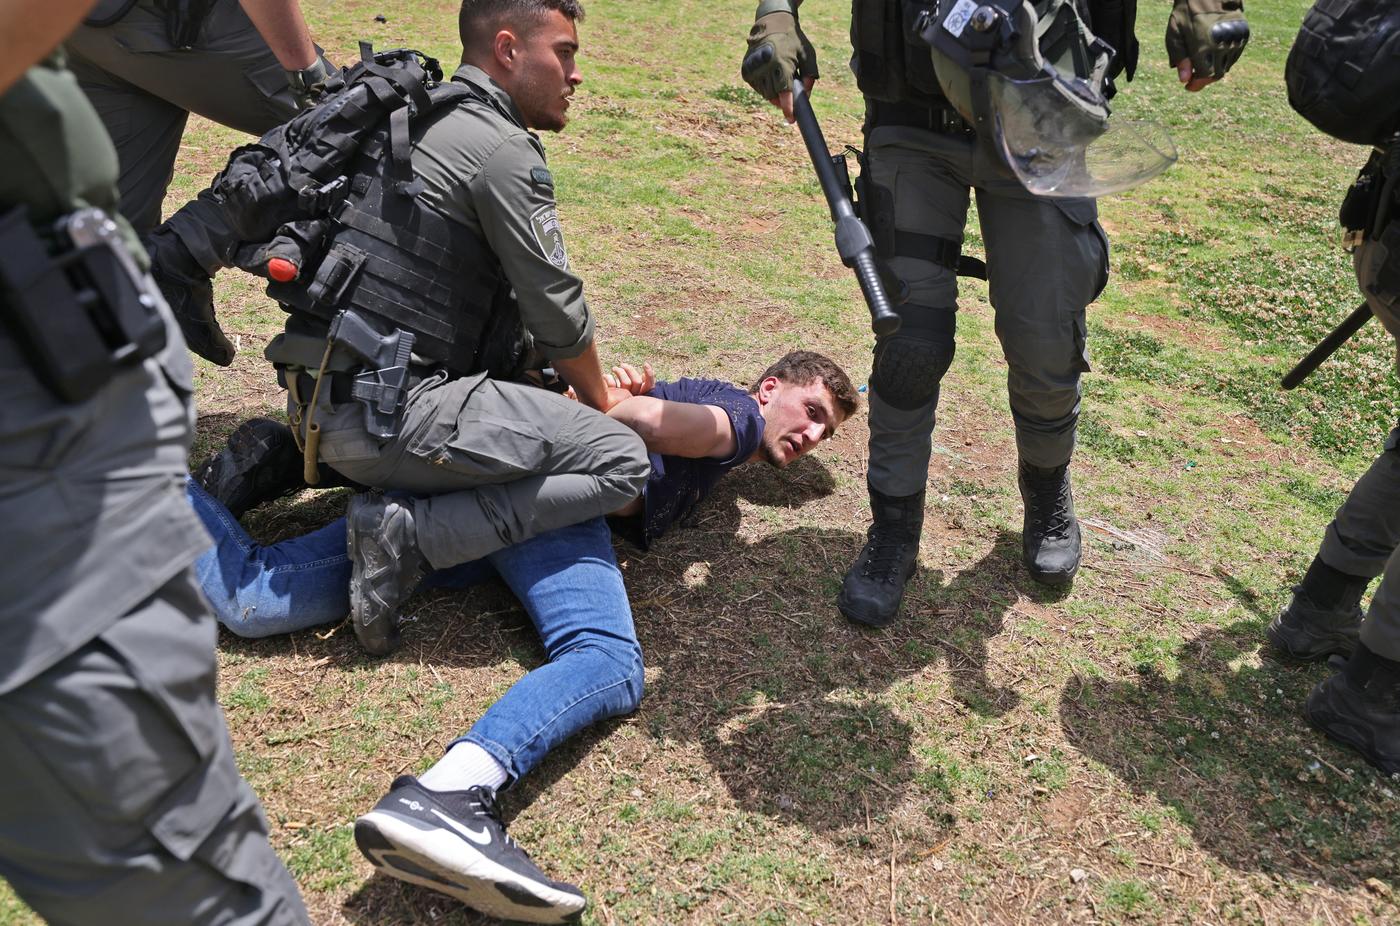 Palestinian protester arrested